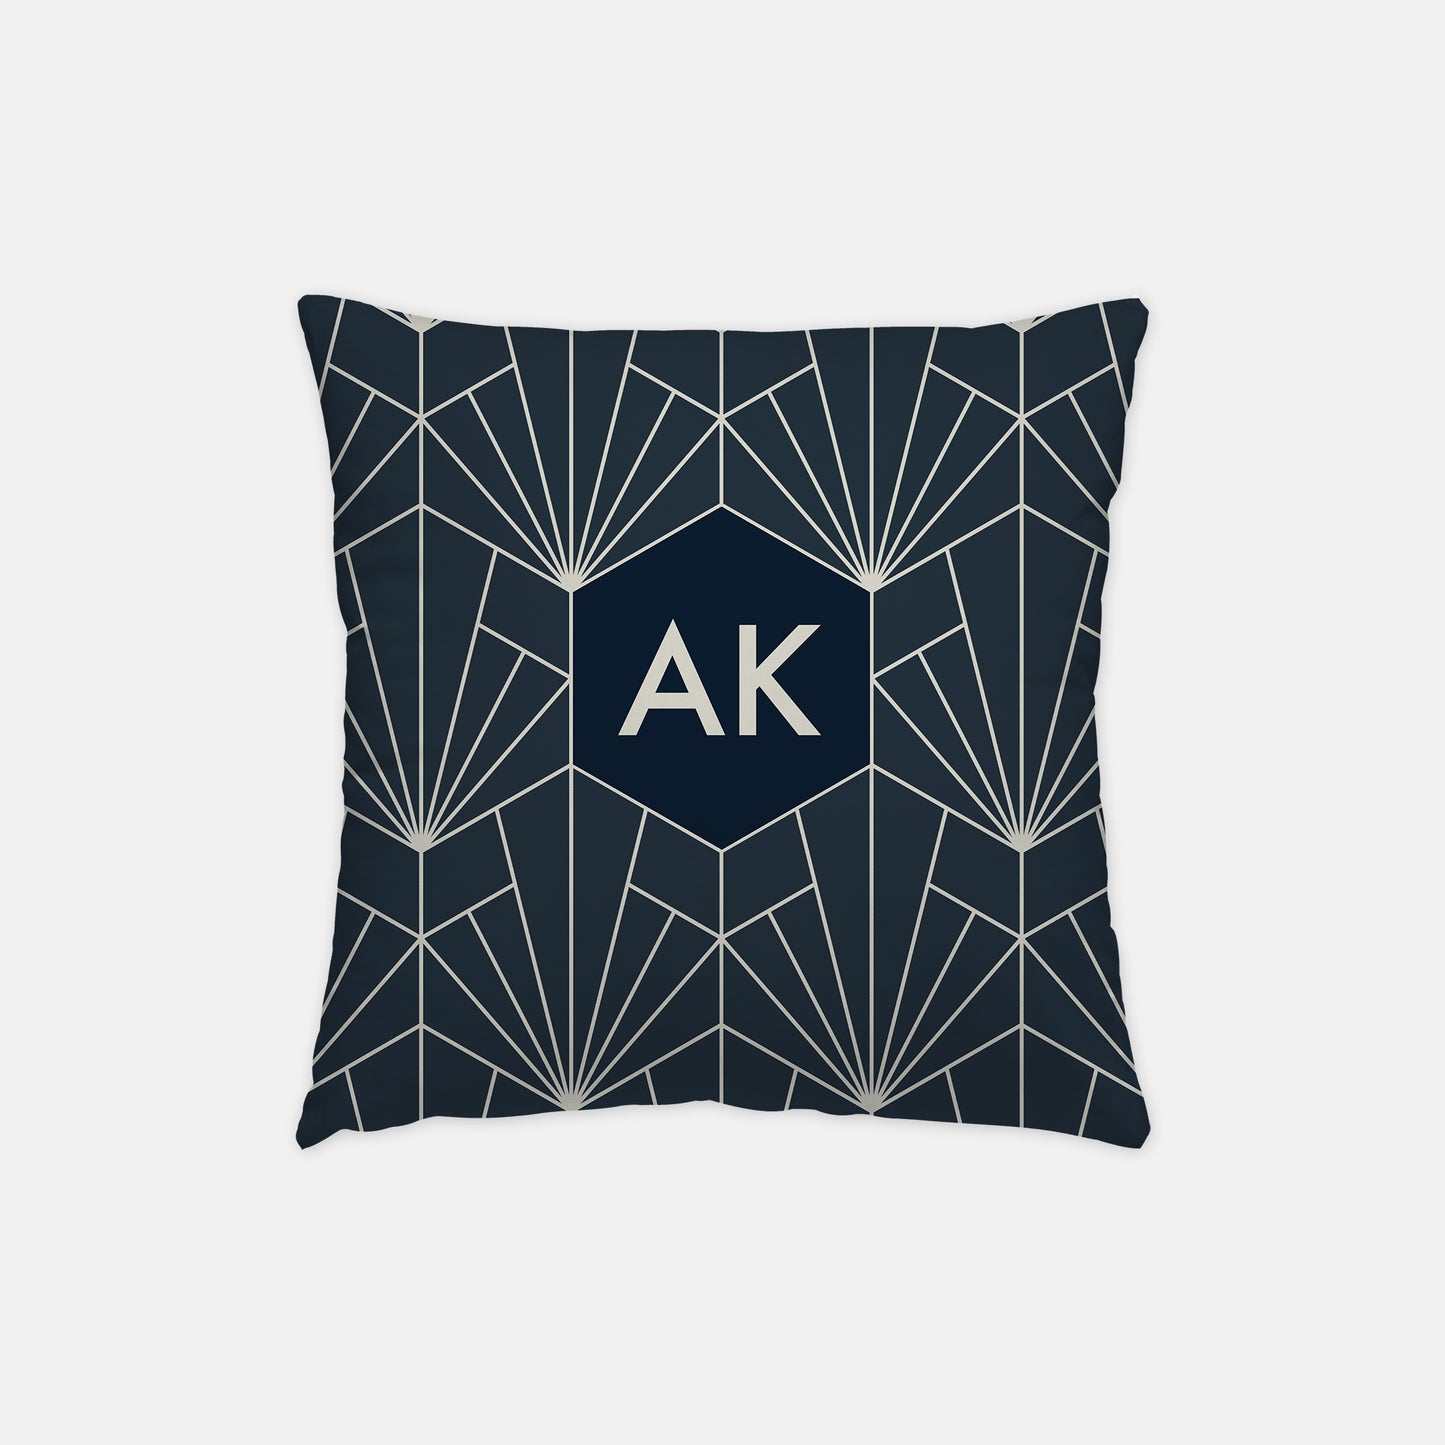 Midnight Art Deco Gift Bundle Pillow and Blanket Set - Personalized and Branded